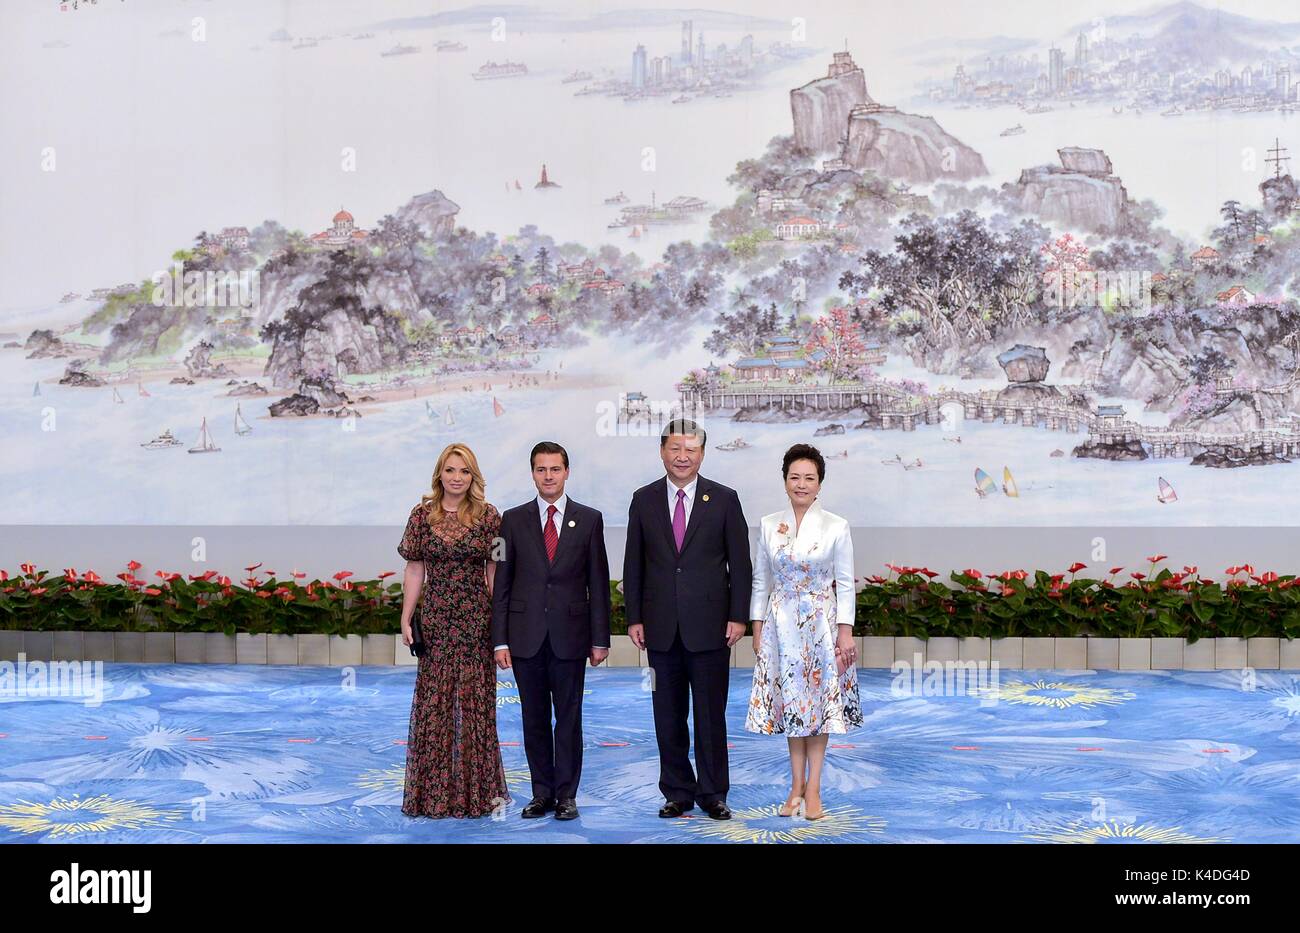 Mexican President Enrique Pena Nieto and his wife Angelica Rivera, right, stand with Chinese President Xi Jinping and his wife Peng Liyuan before the start of the official reception September 5, 2017 in Xiamen, China. Stock Photo